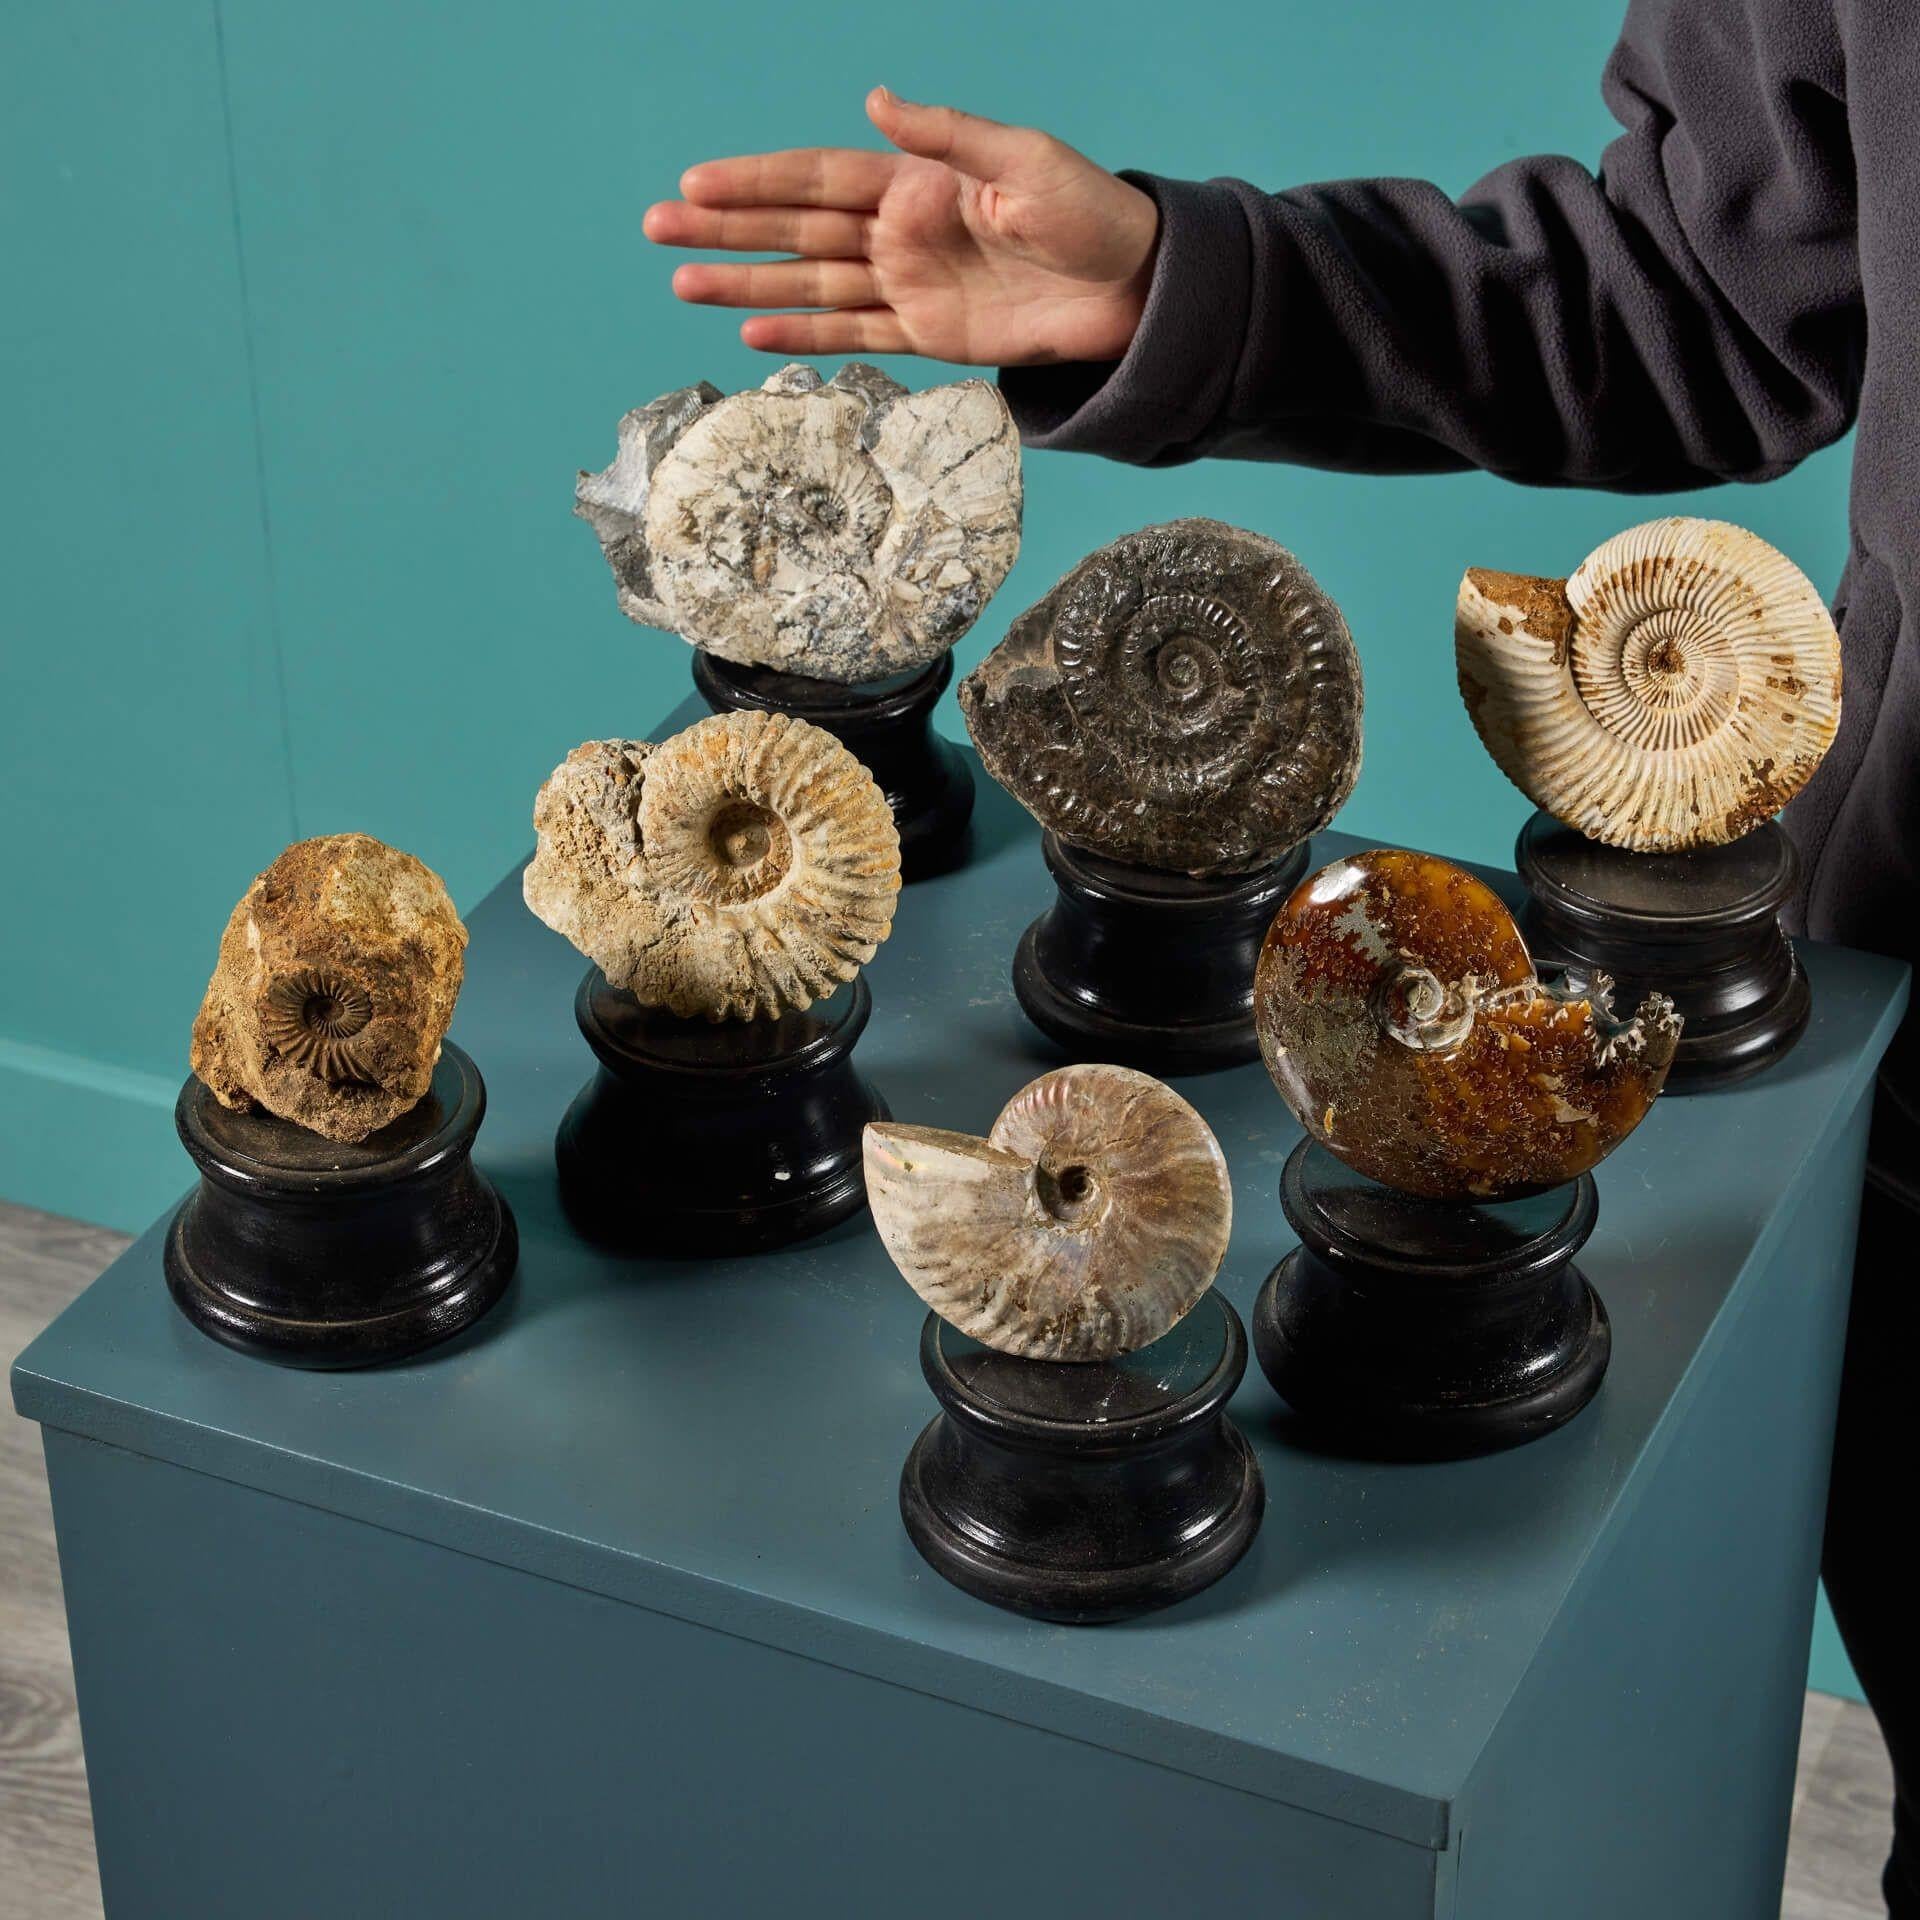 A superb set of 7 ancient prehistoric ammonite fossils presented on our small turned painted plaster bases. This group showcases ammonites of varying tone, texture and tactile finishes. Highlights of this collection include the polished jigsaw